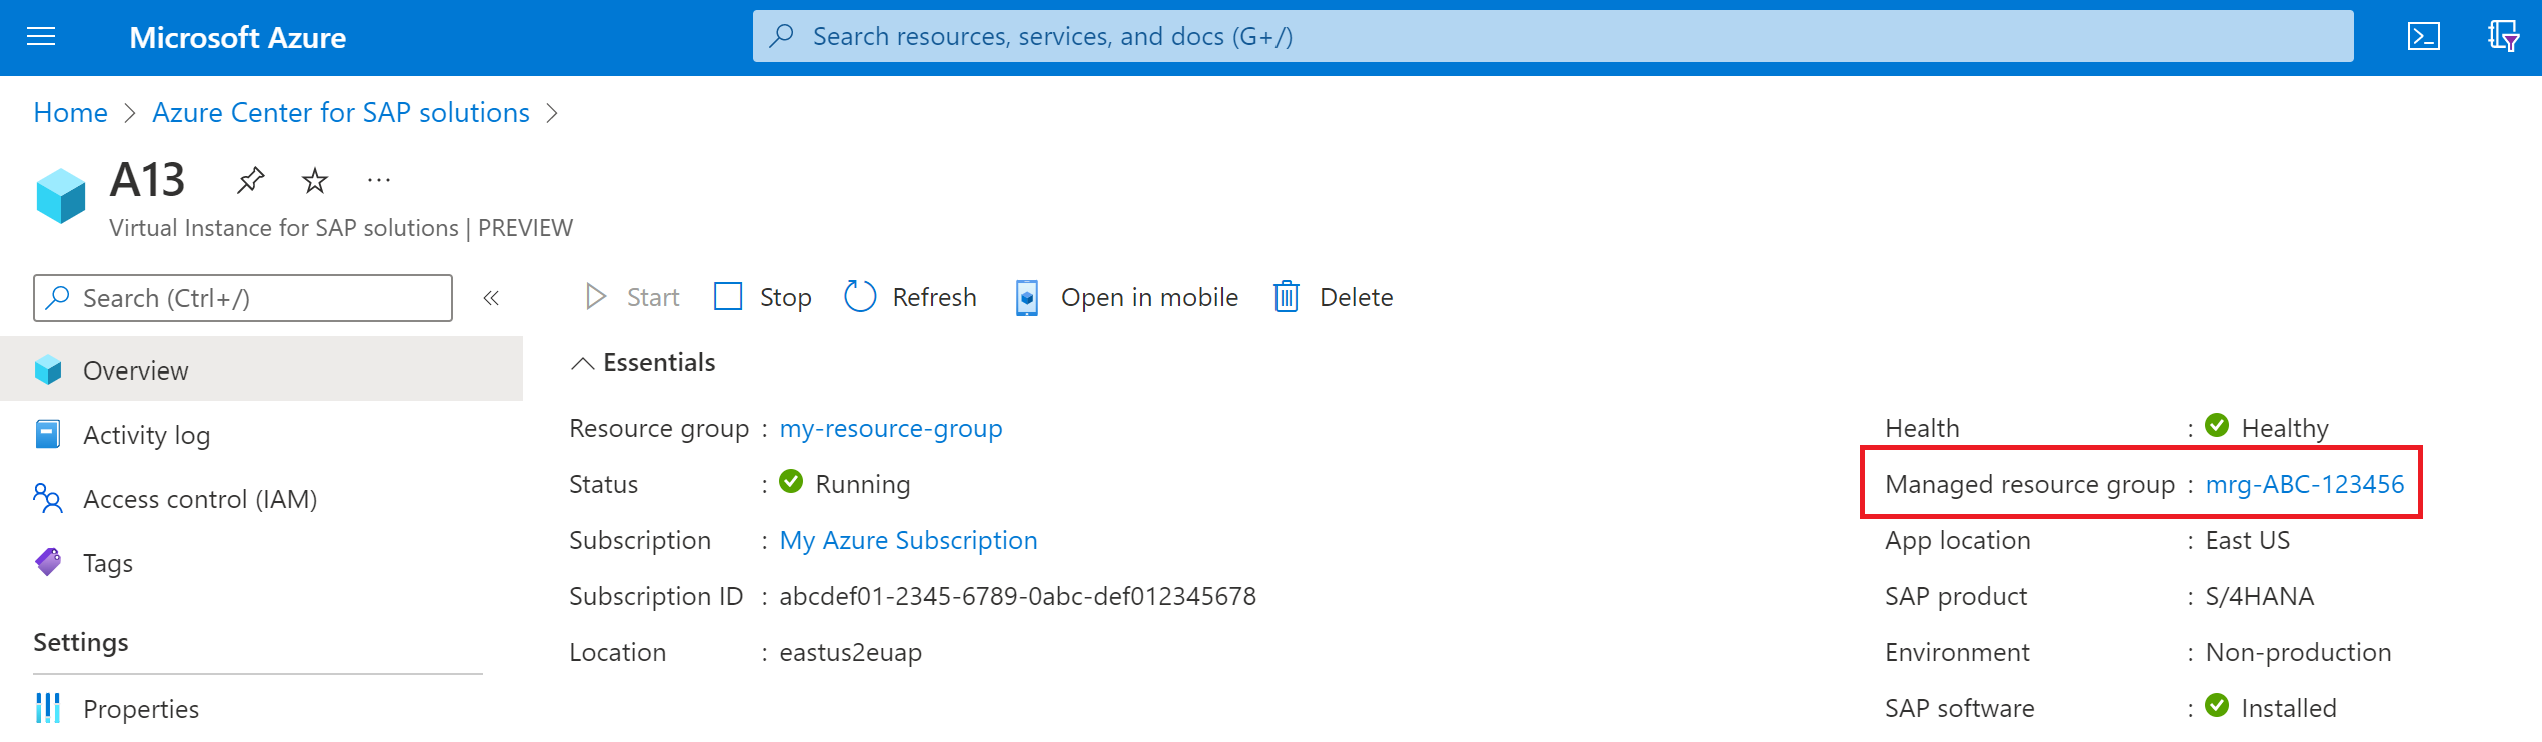 Screenshot of VIS resource in the Azure portal, showing selection of managed resource group on the overview page.